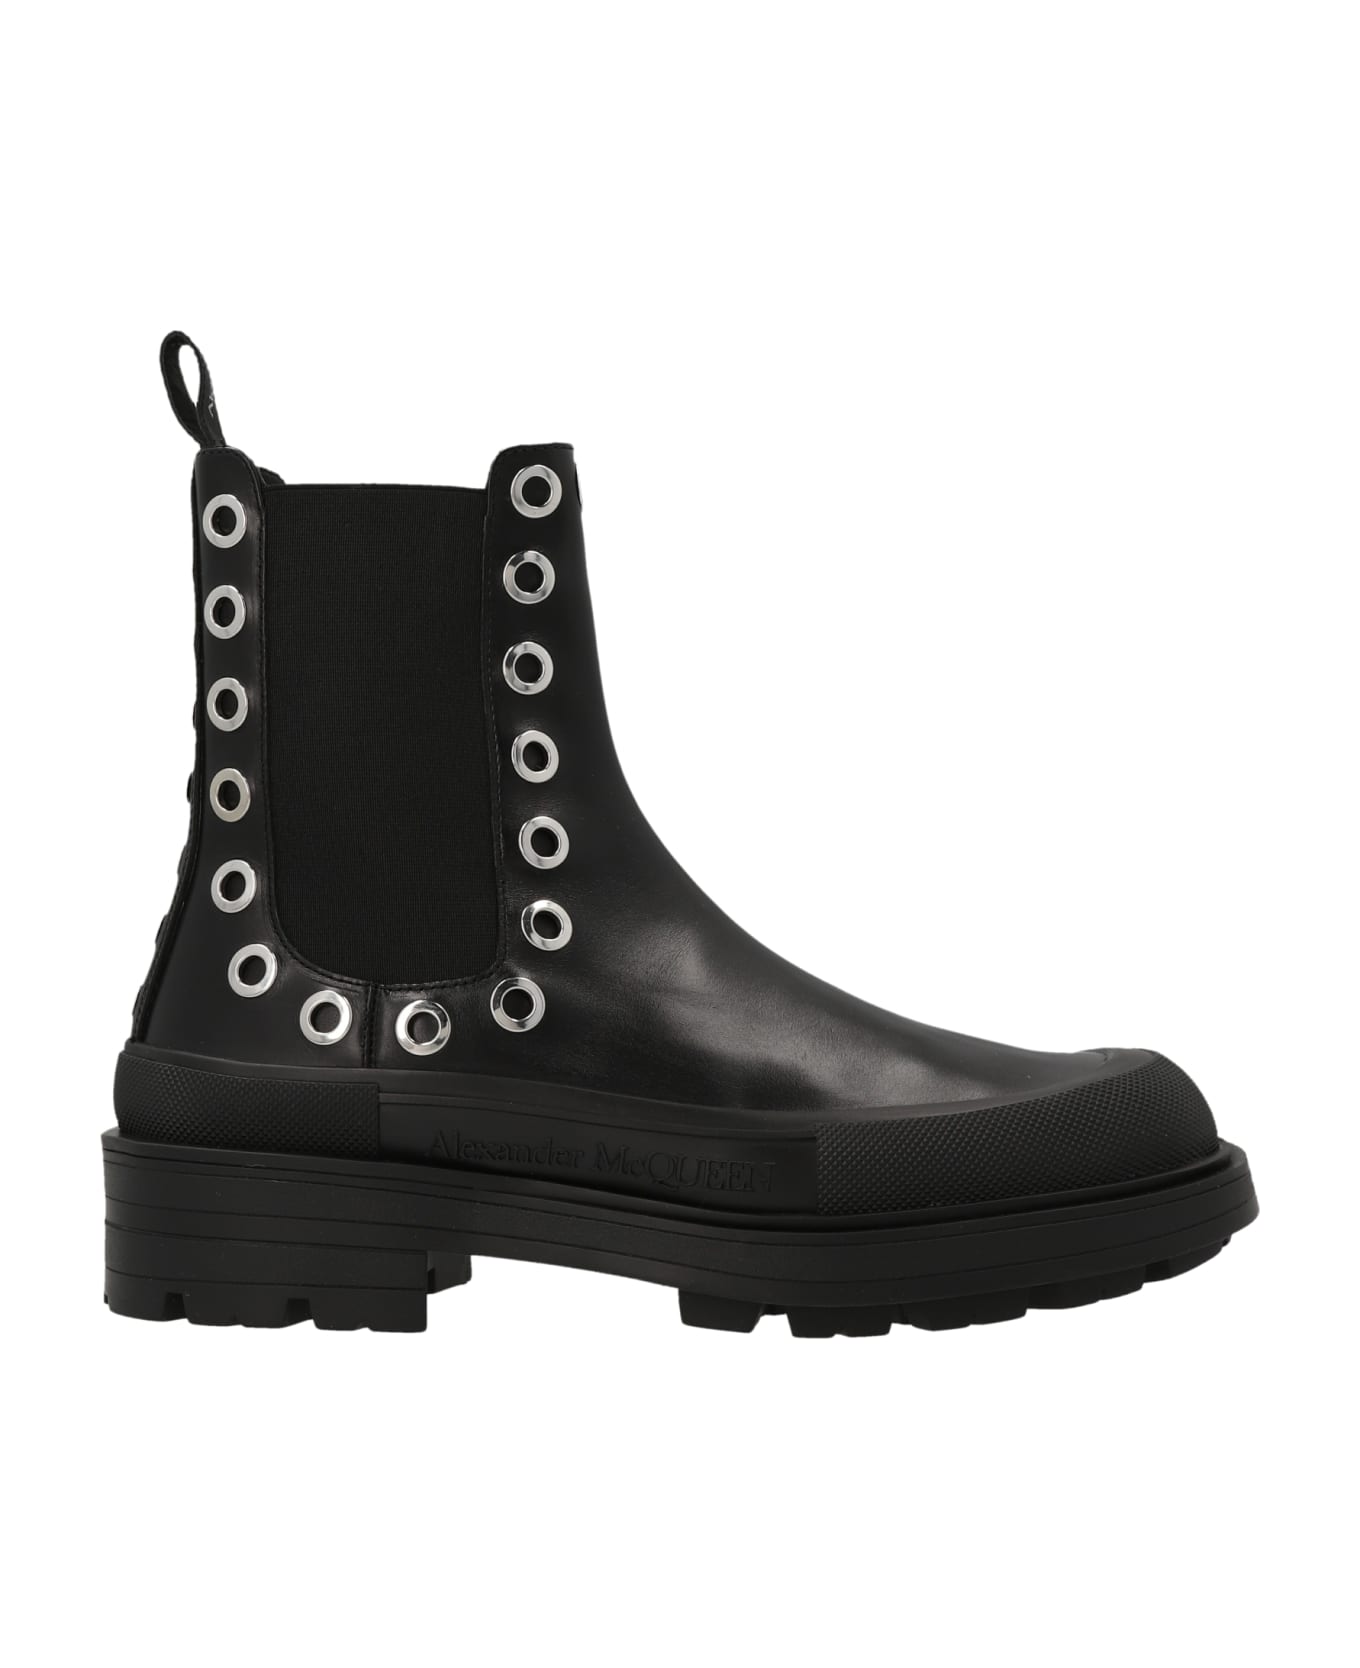 Alexander McQueen 'boxcar' Ankle Boots - Black ブーツ